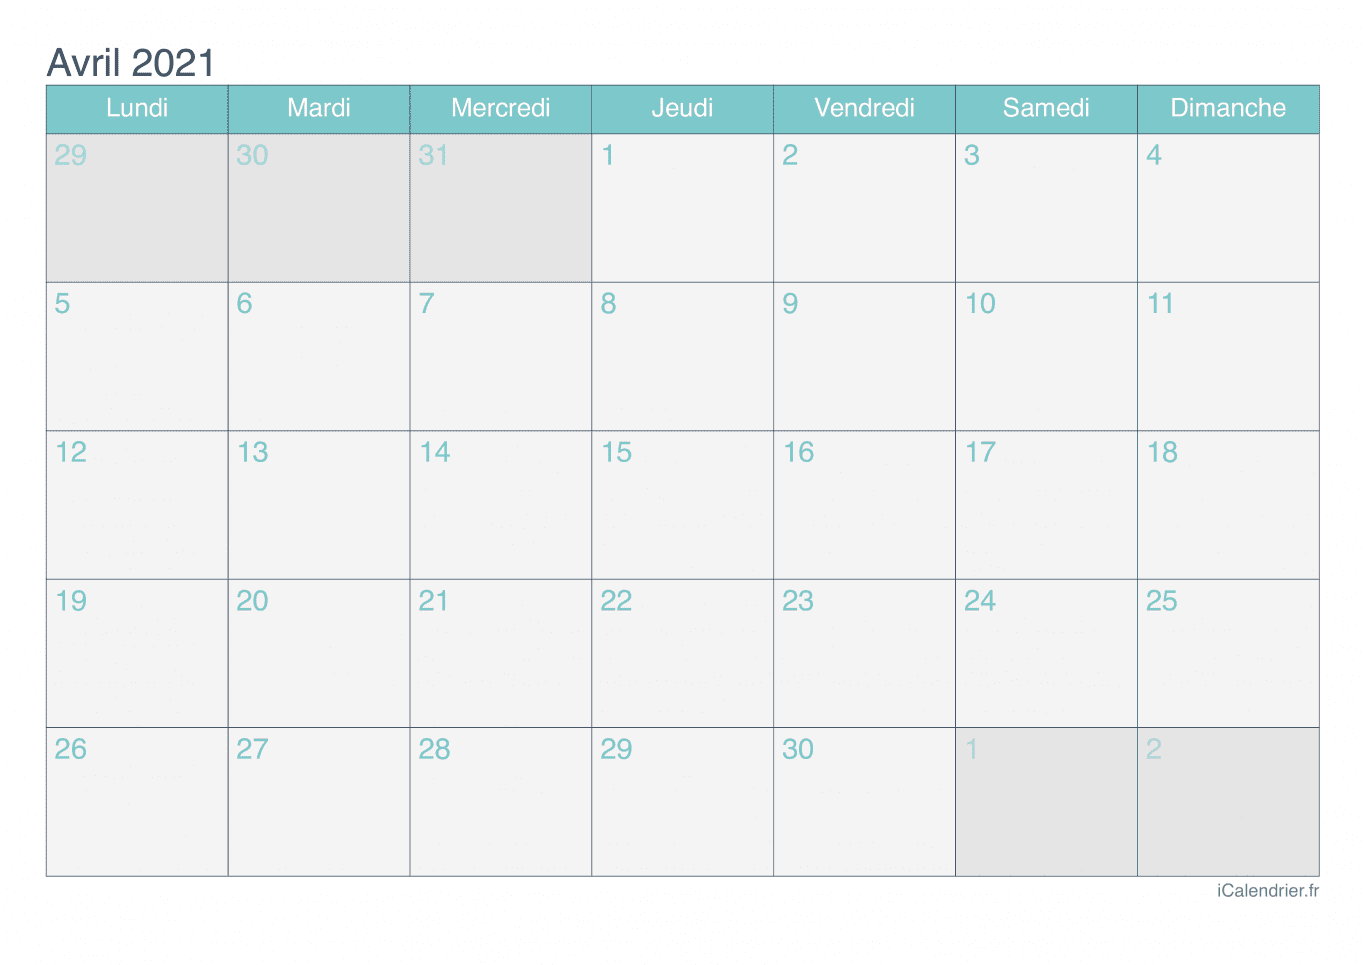 Calendrier d'avril 2021 - Turquoise